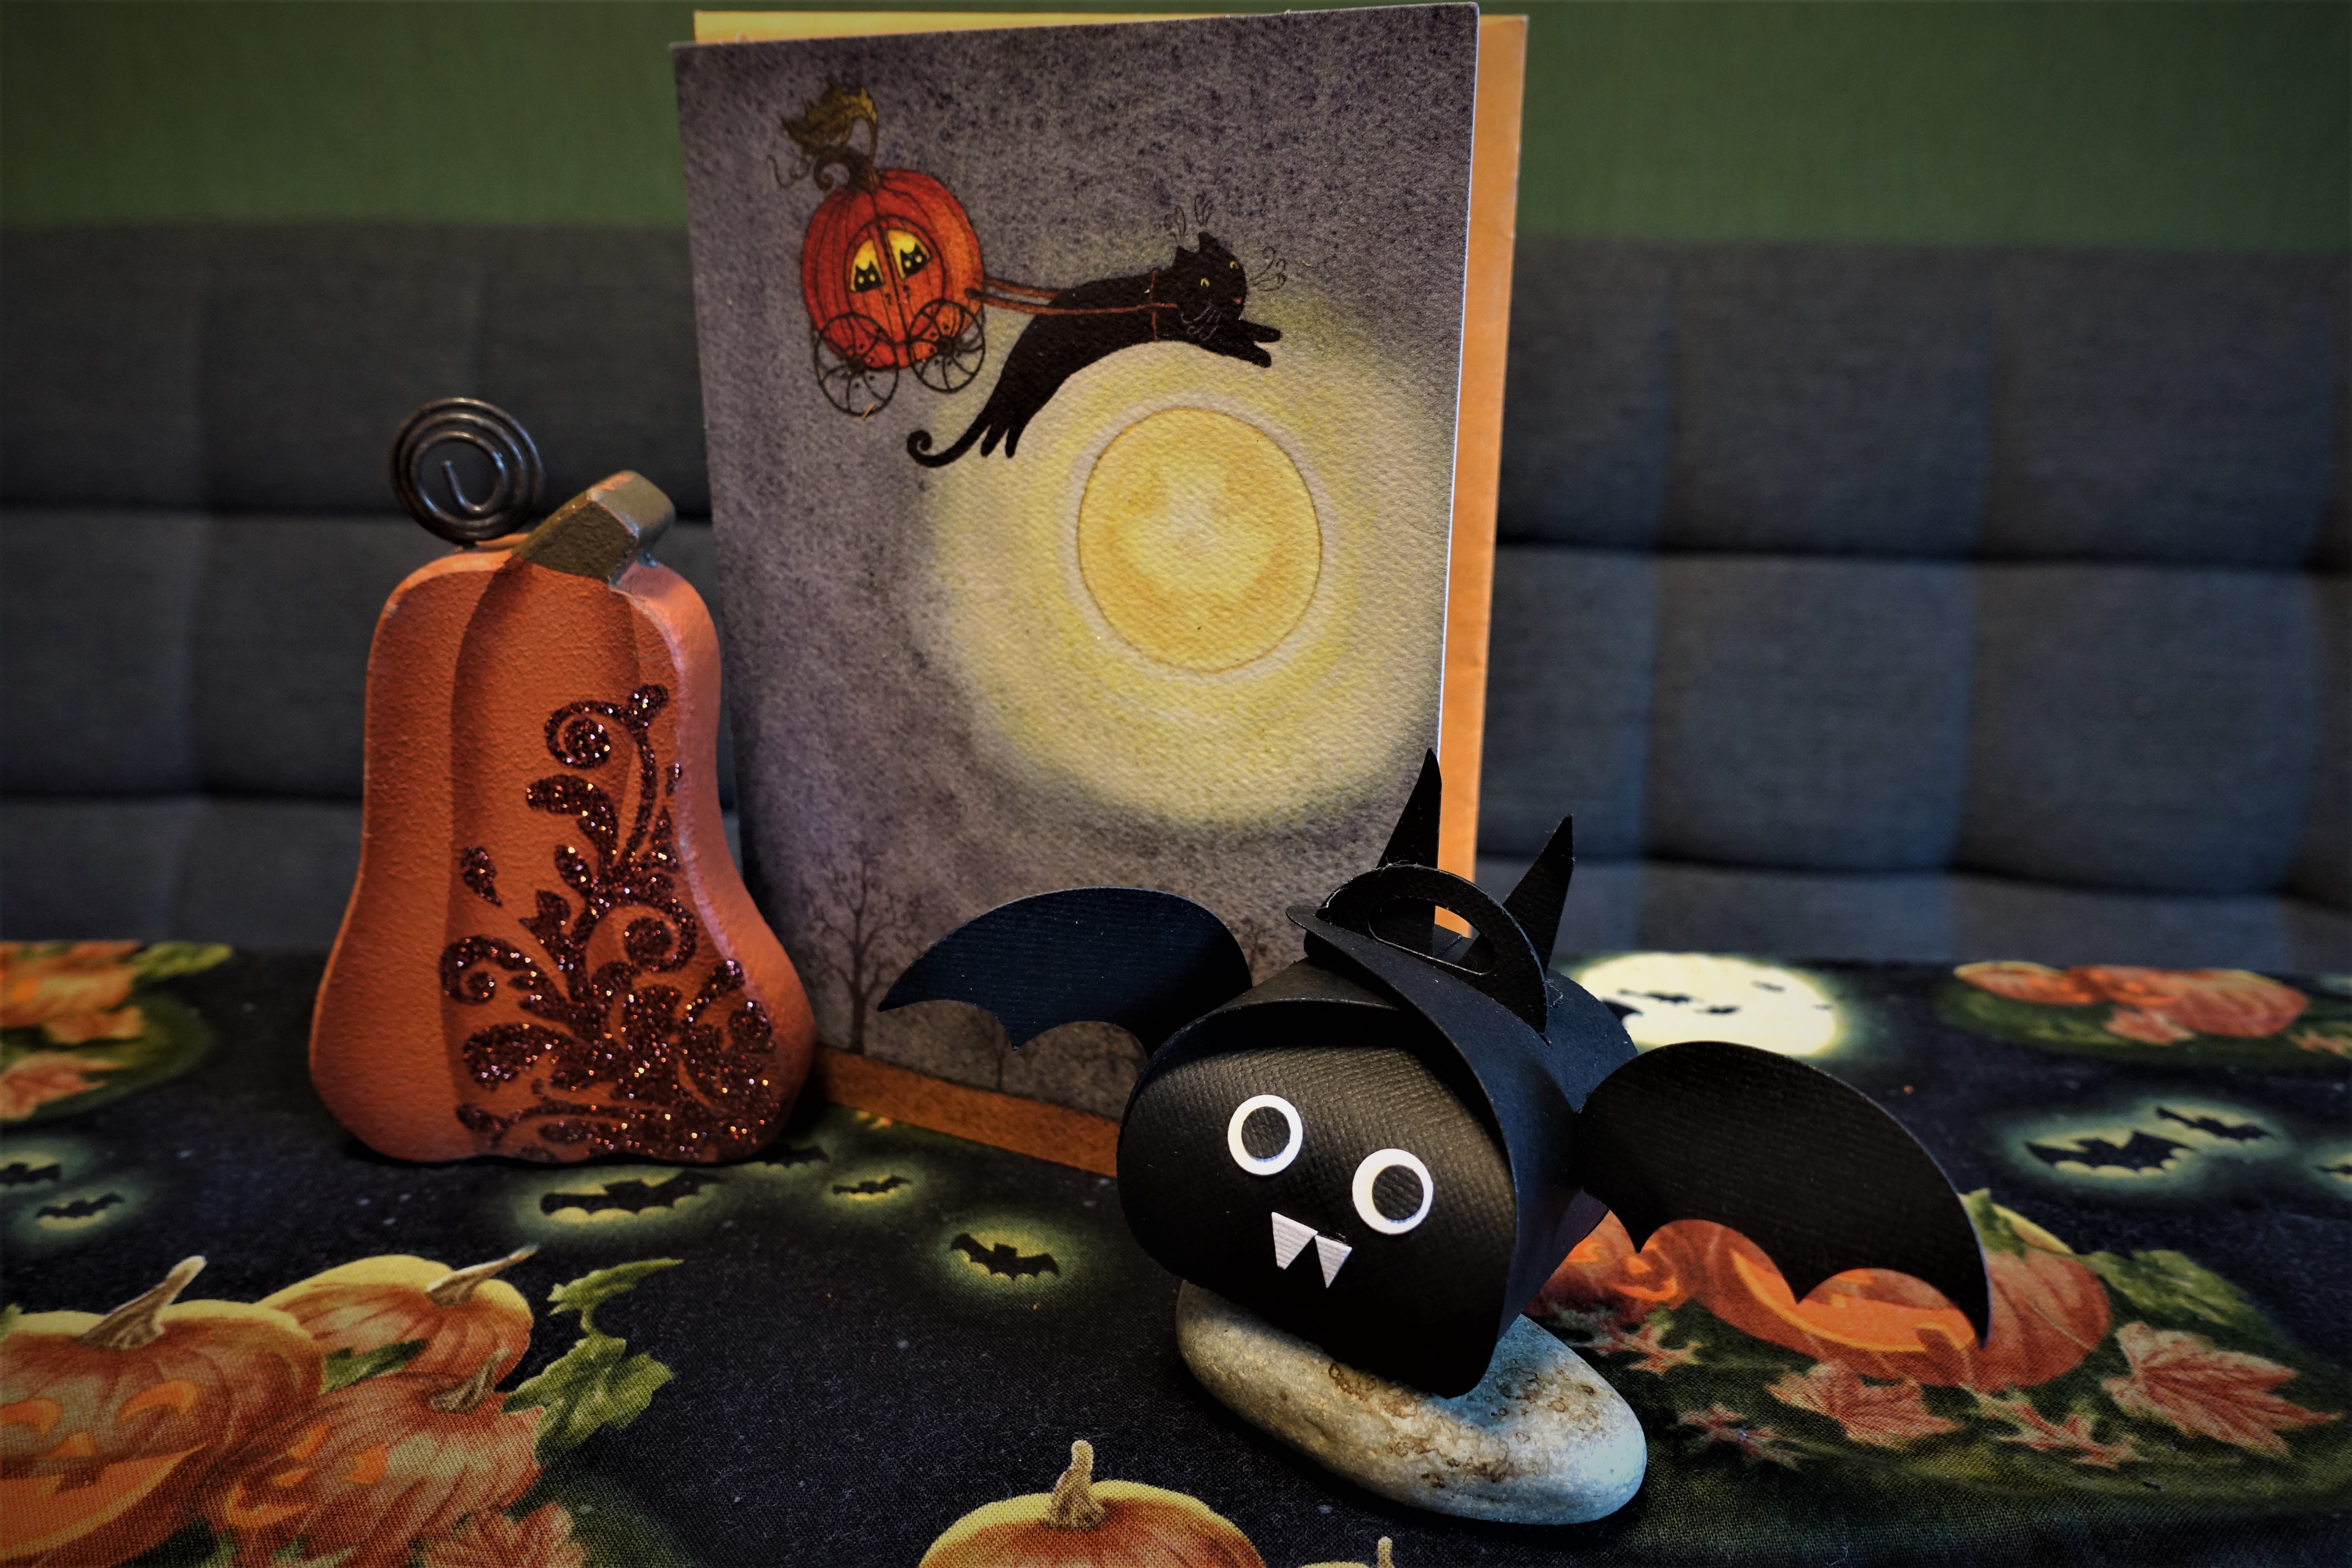 Closed Halloween paper bat box sitting on a decorated table